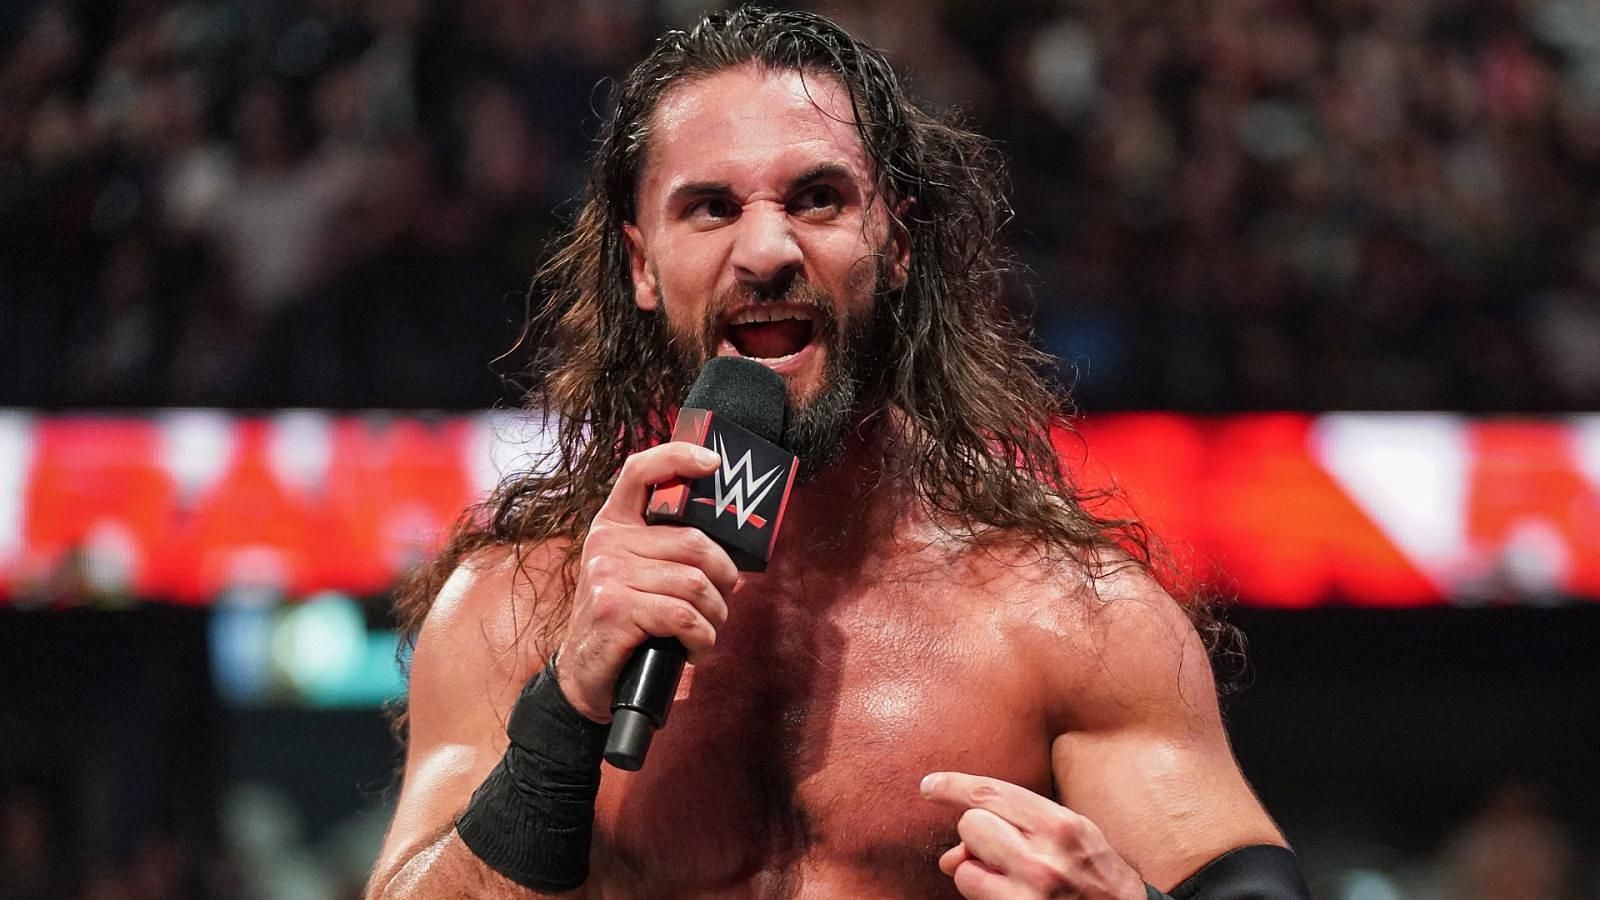 Seth Rollins has had some problems on social media